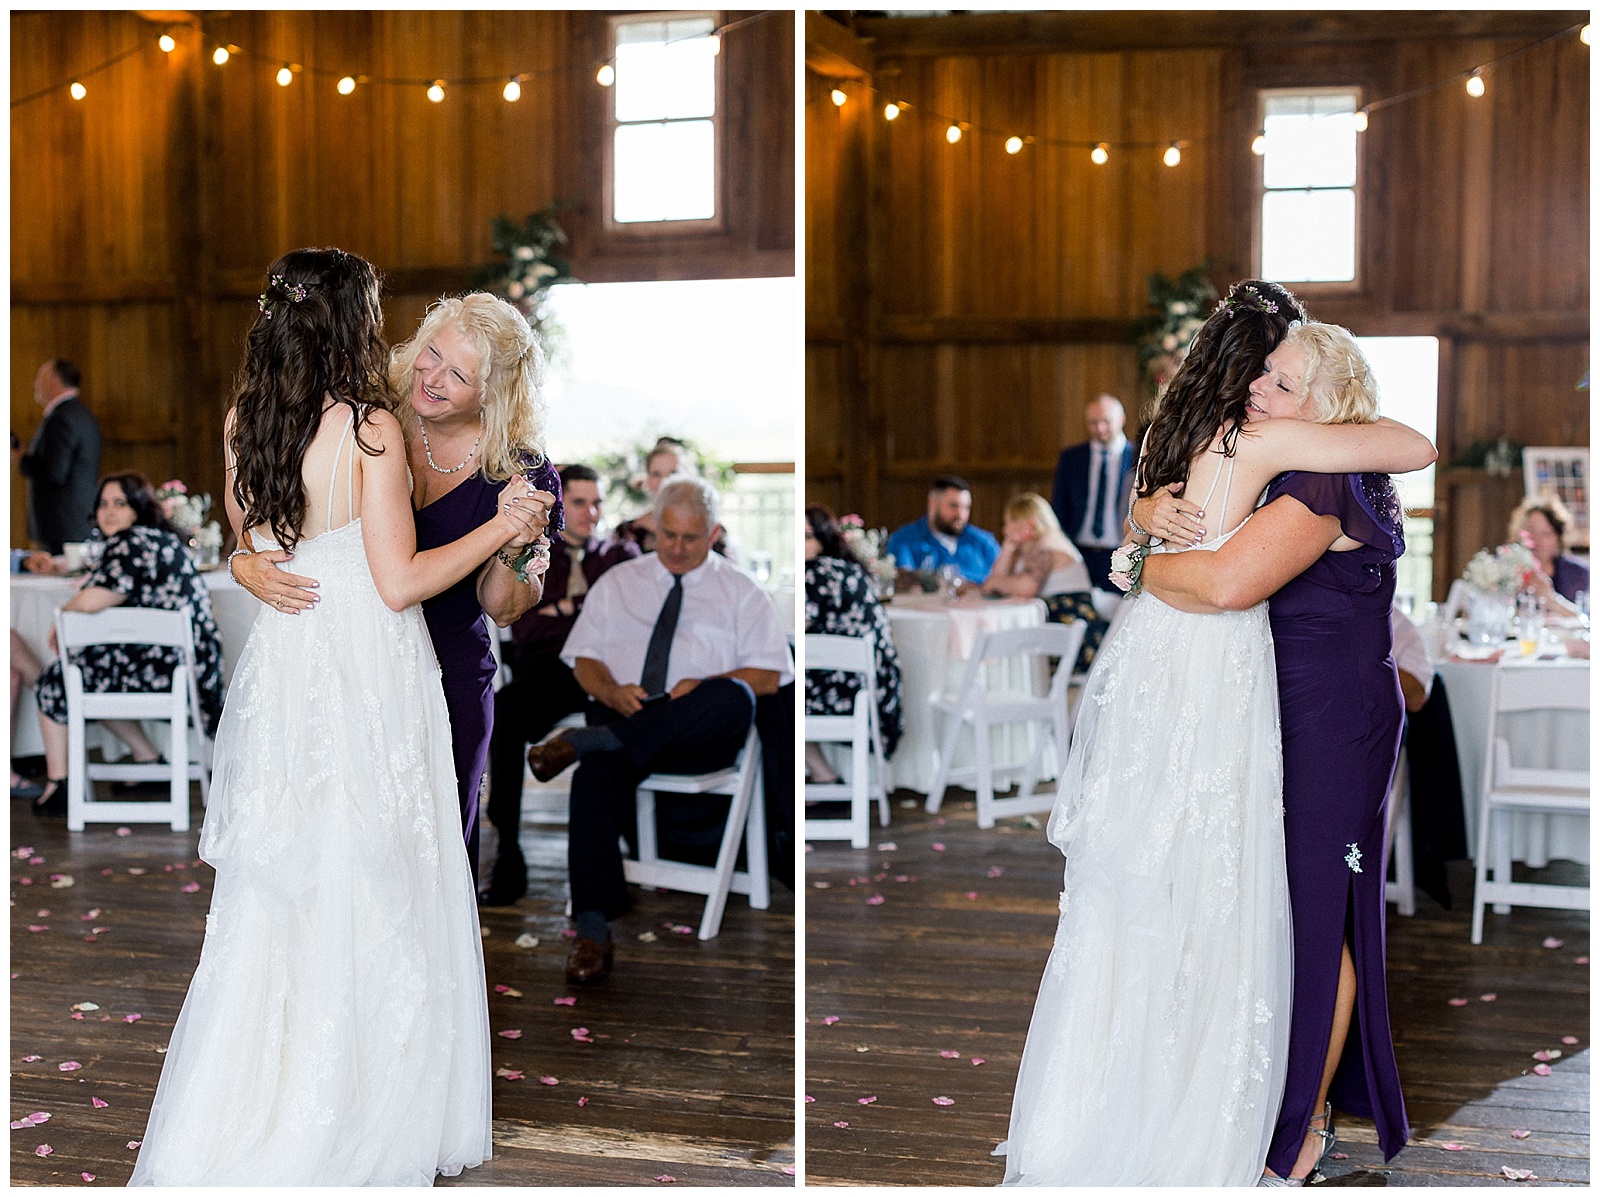 mother of the bride and bride share a dance at the wedding reception at lakefield weddings, a modern barn wedding venue